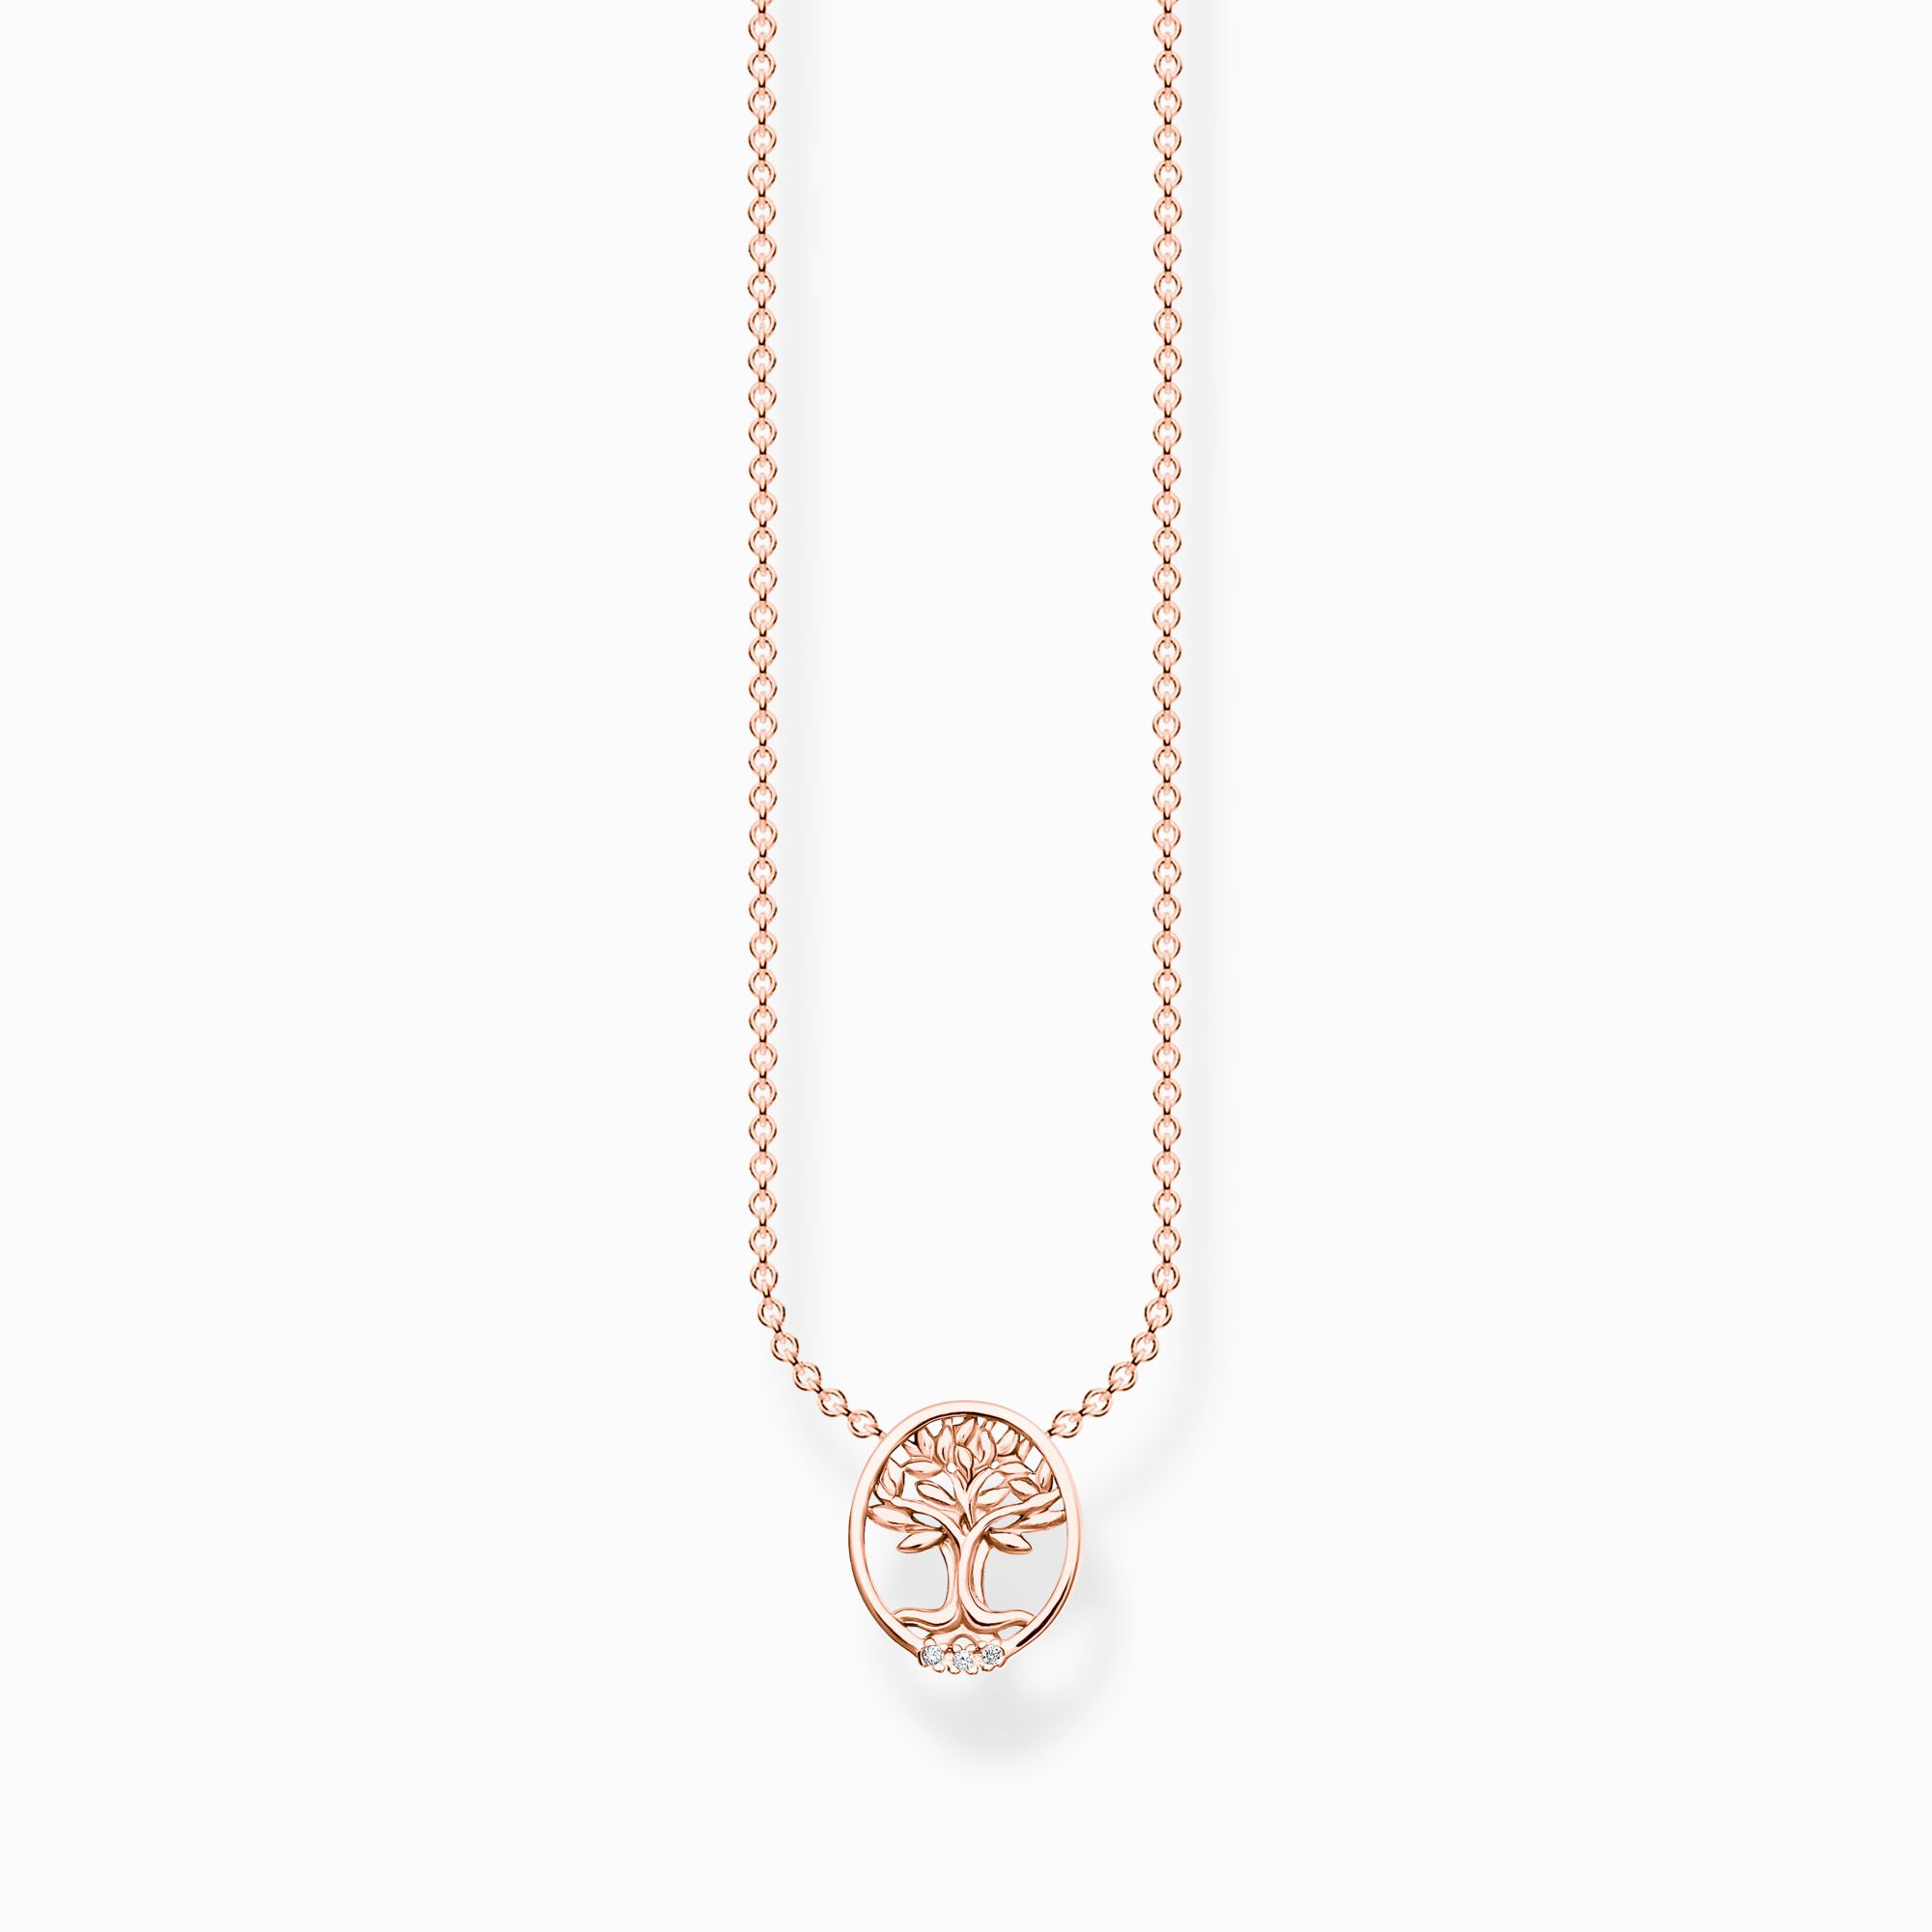 Necklace Tree of Love with white stones rosegold from the Charming Collection collection in the THOMAS SABO online store